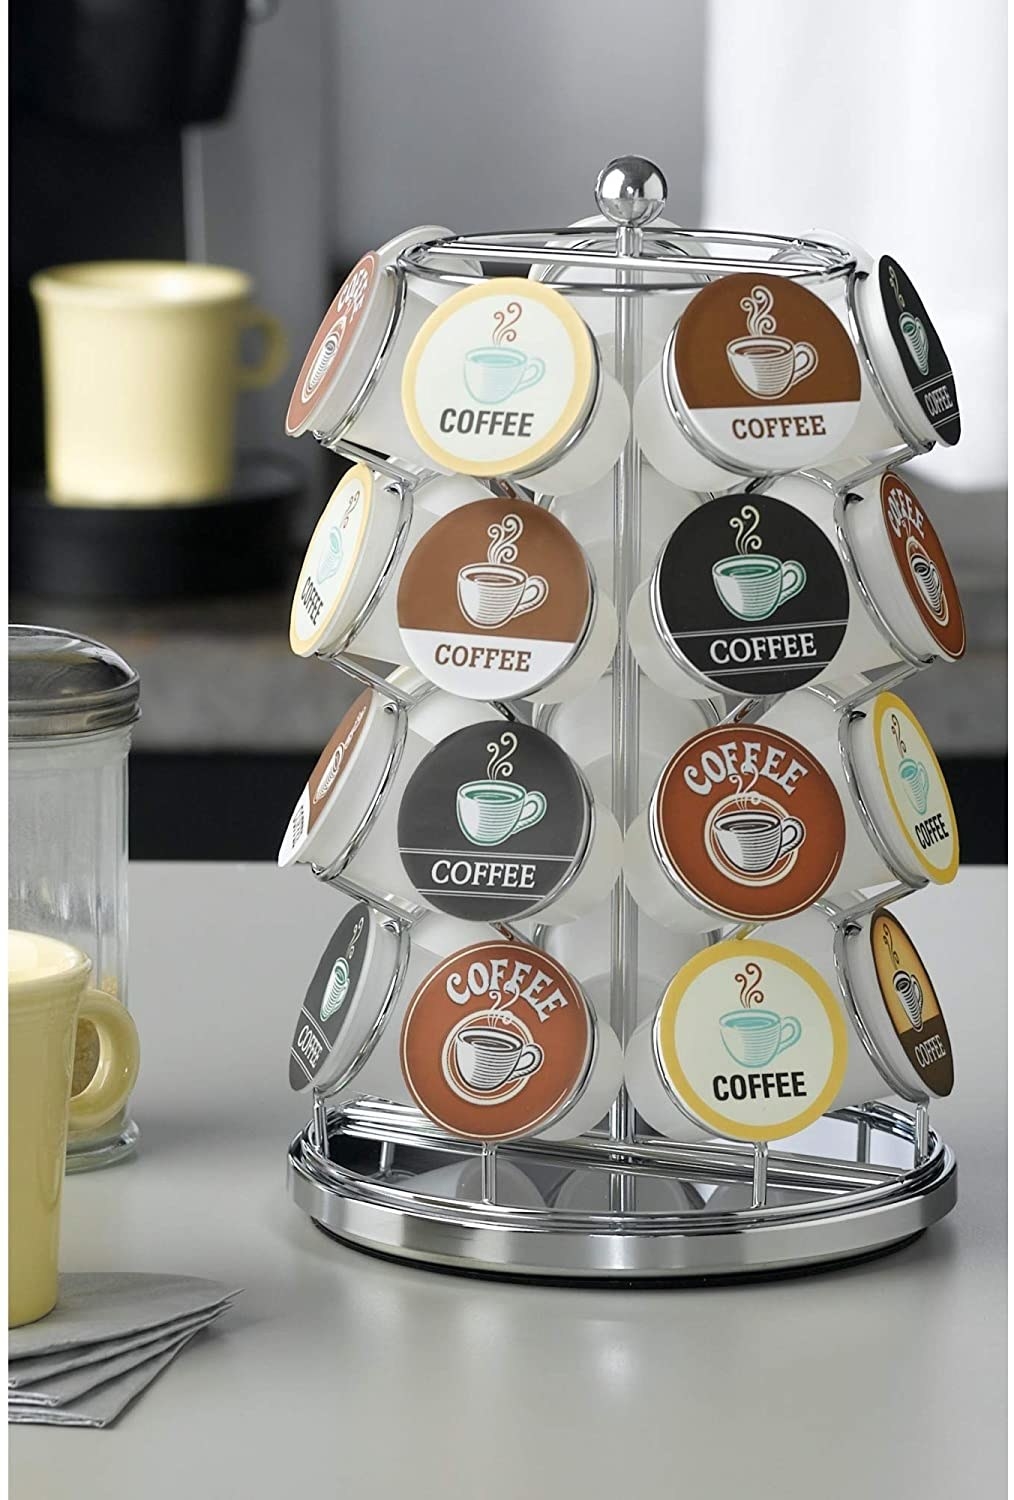 A small carousel with K-Cup pods in them